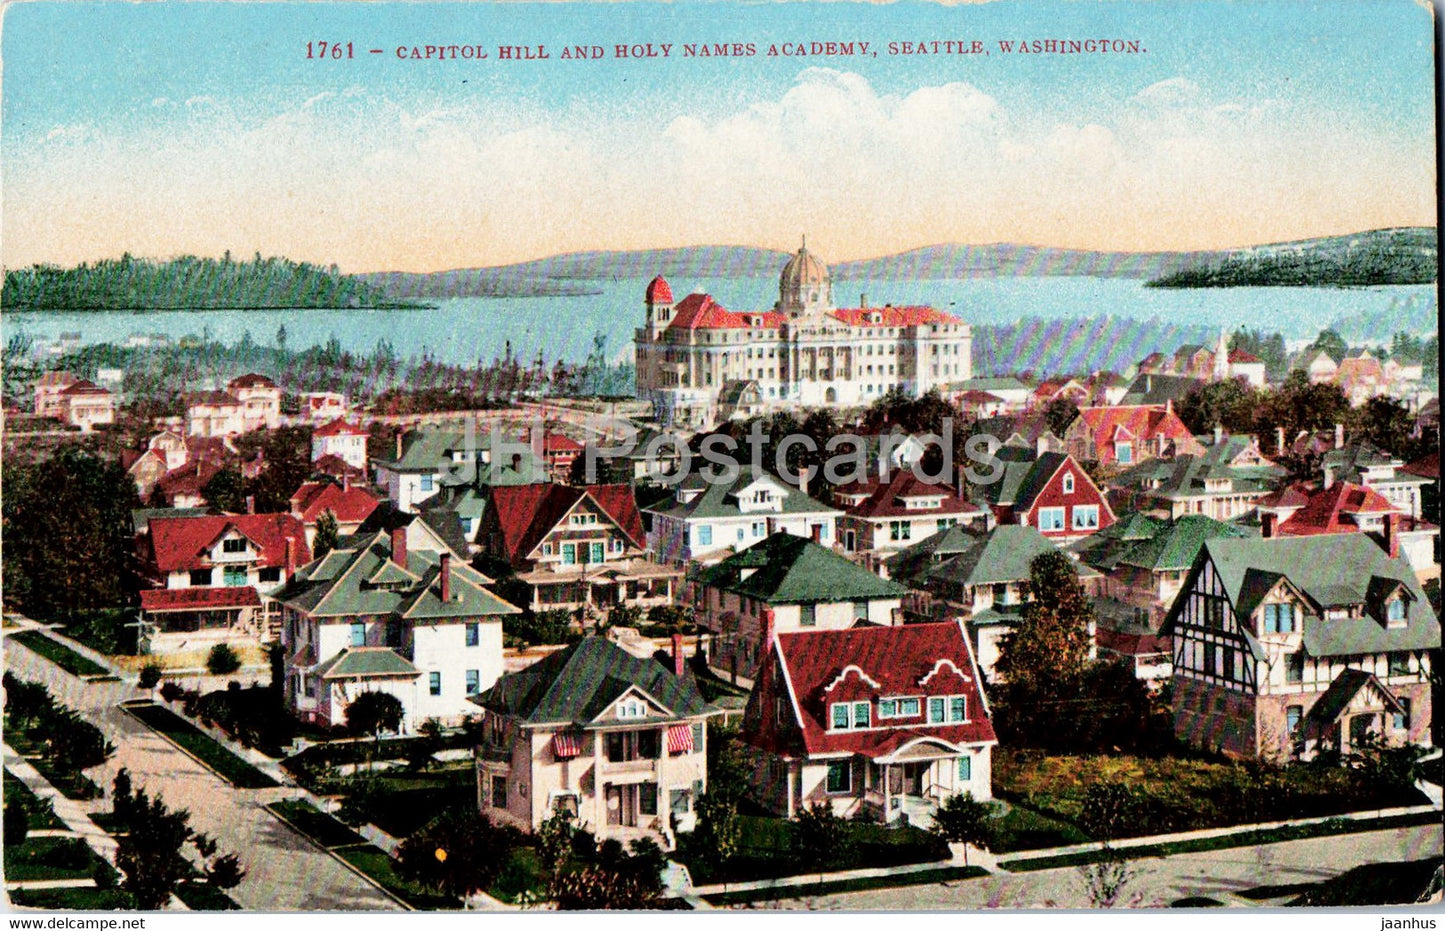 Capitol Hill and Holy Names Academy - Seattle - Washington - 1761 - old postcard - USA - unused - JH Postcards